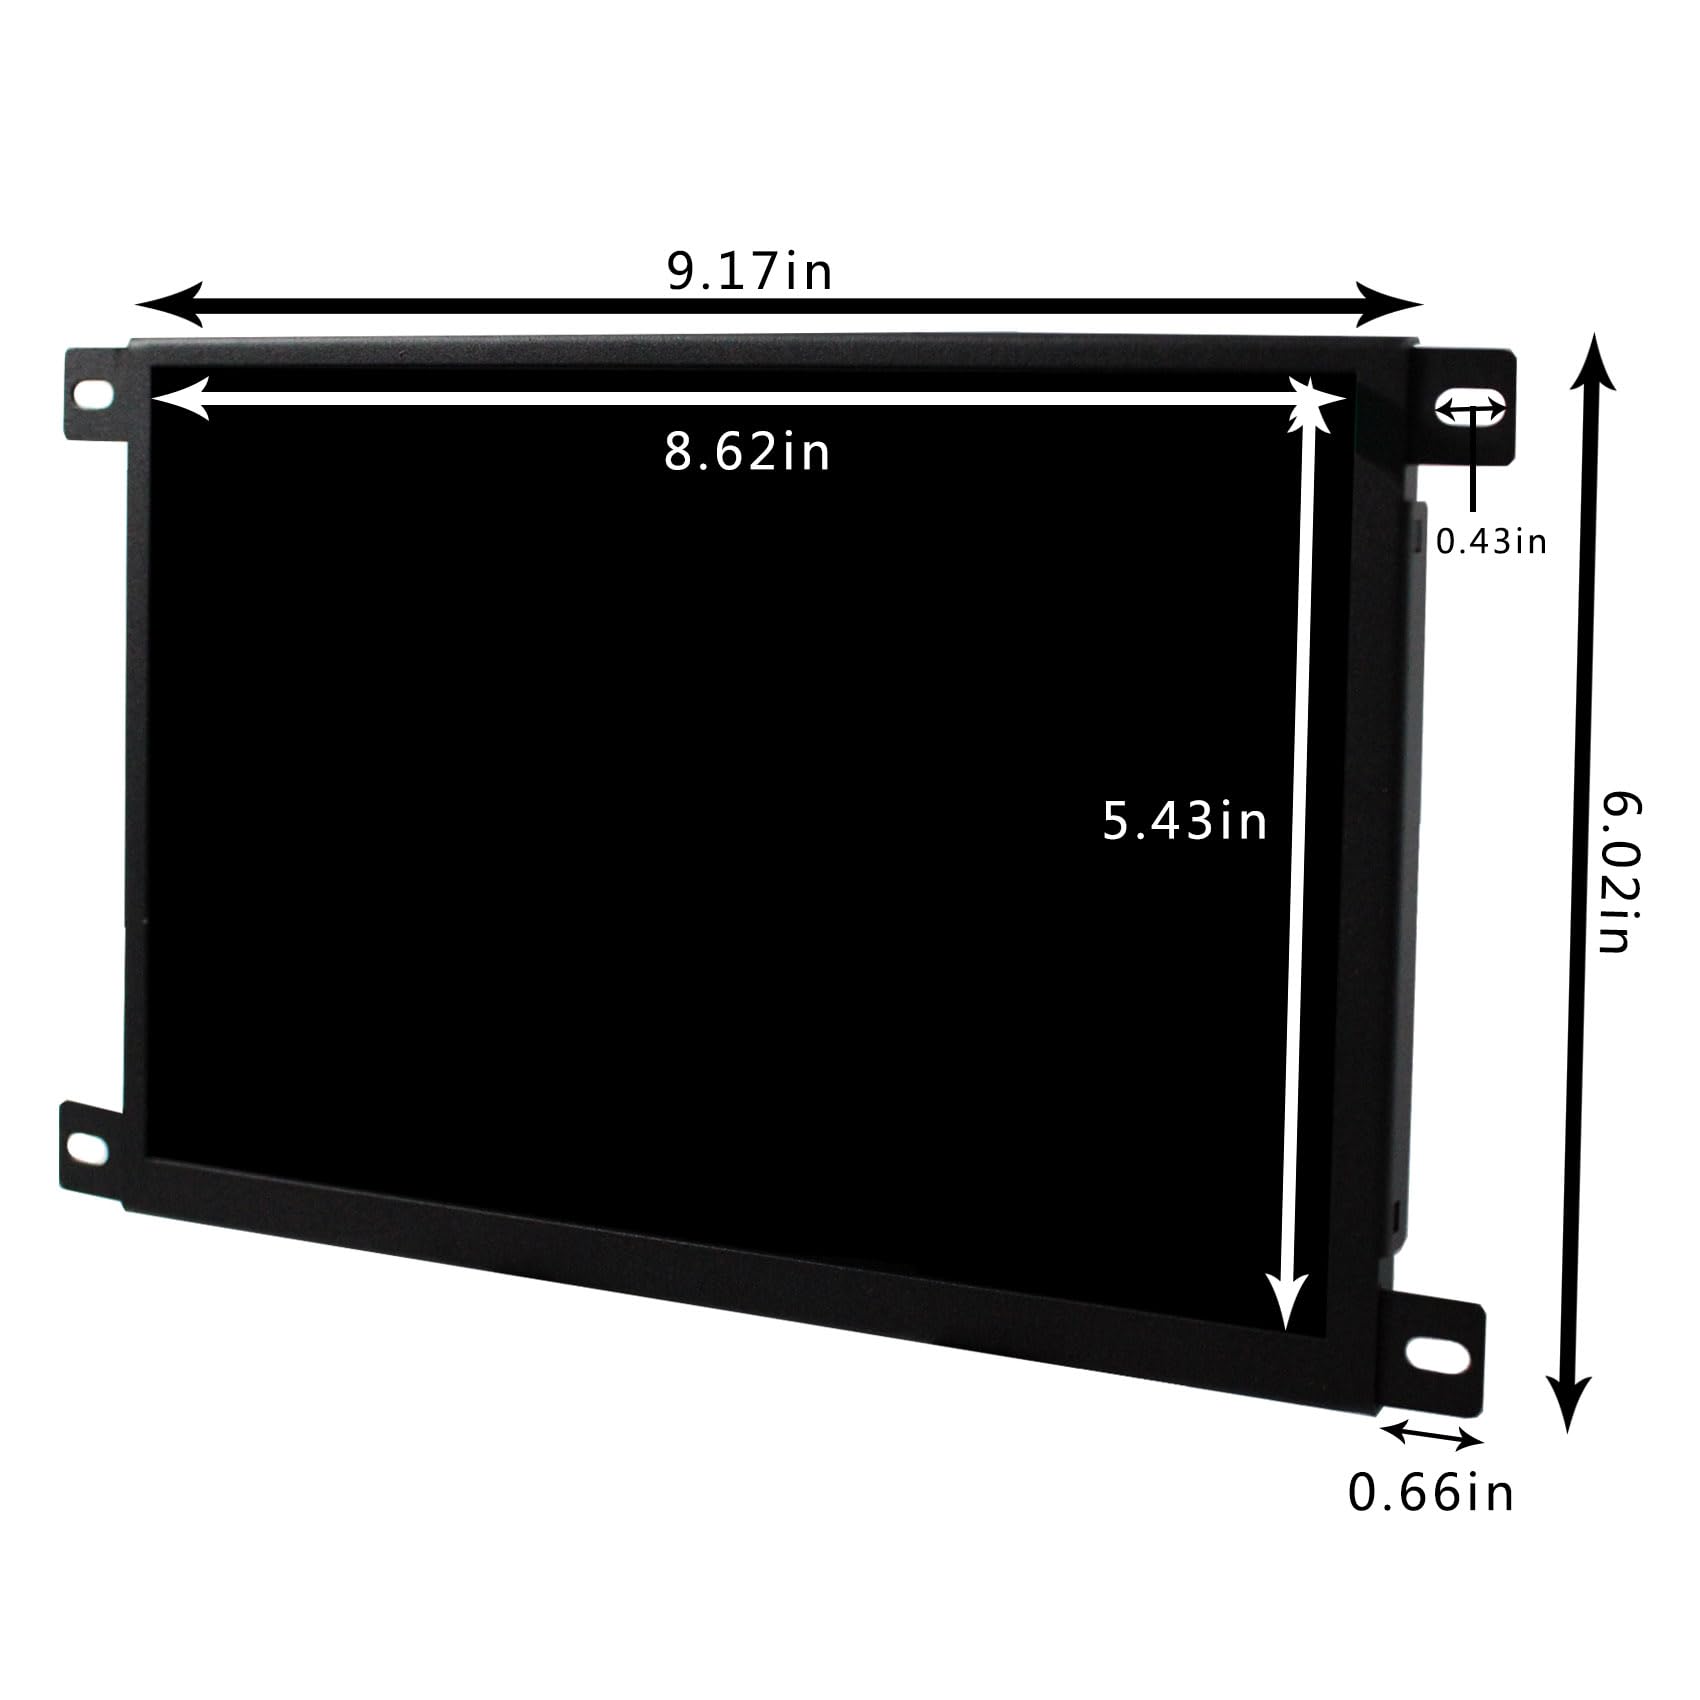 VSDISPLAY 10.1 Inch 1280x800 IPS Small LCD Screen 1000 Nits High Brightness Display Panel with Metal Case,Supports HD-MI USB Video Input